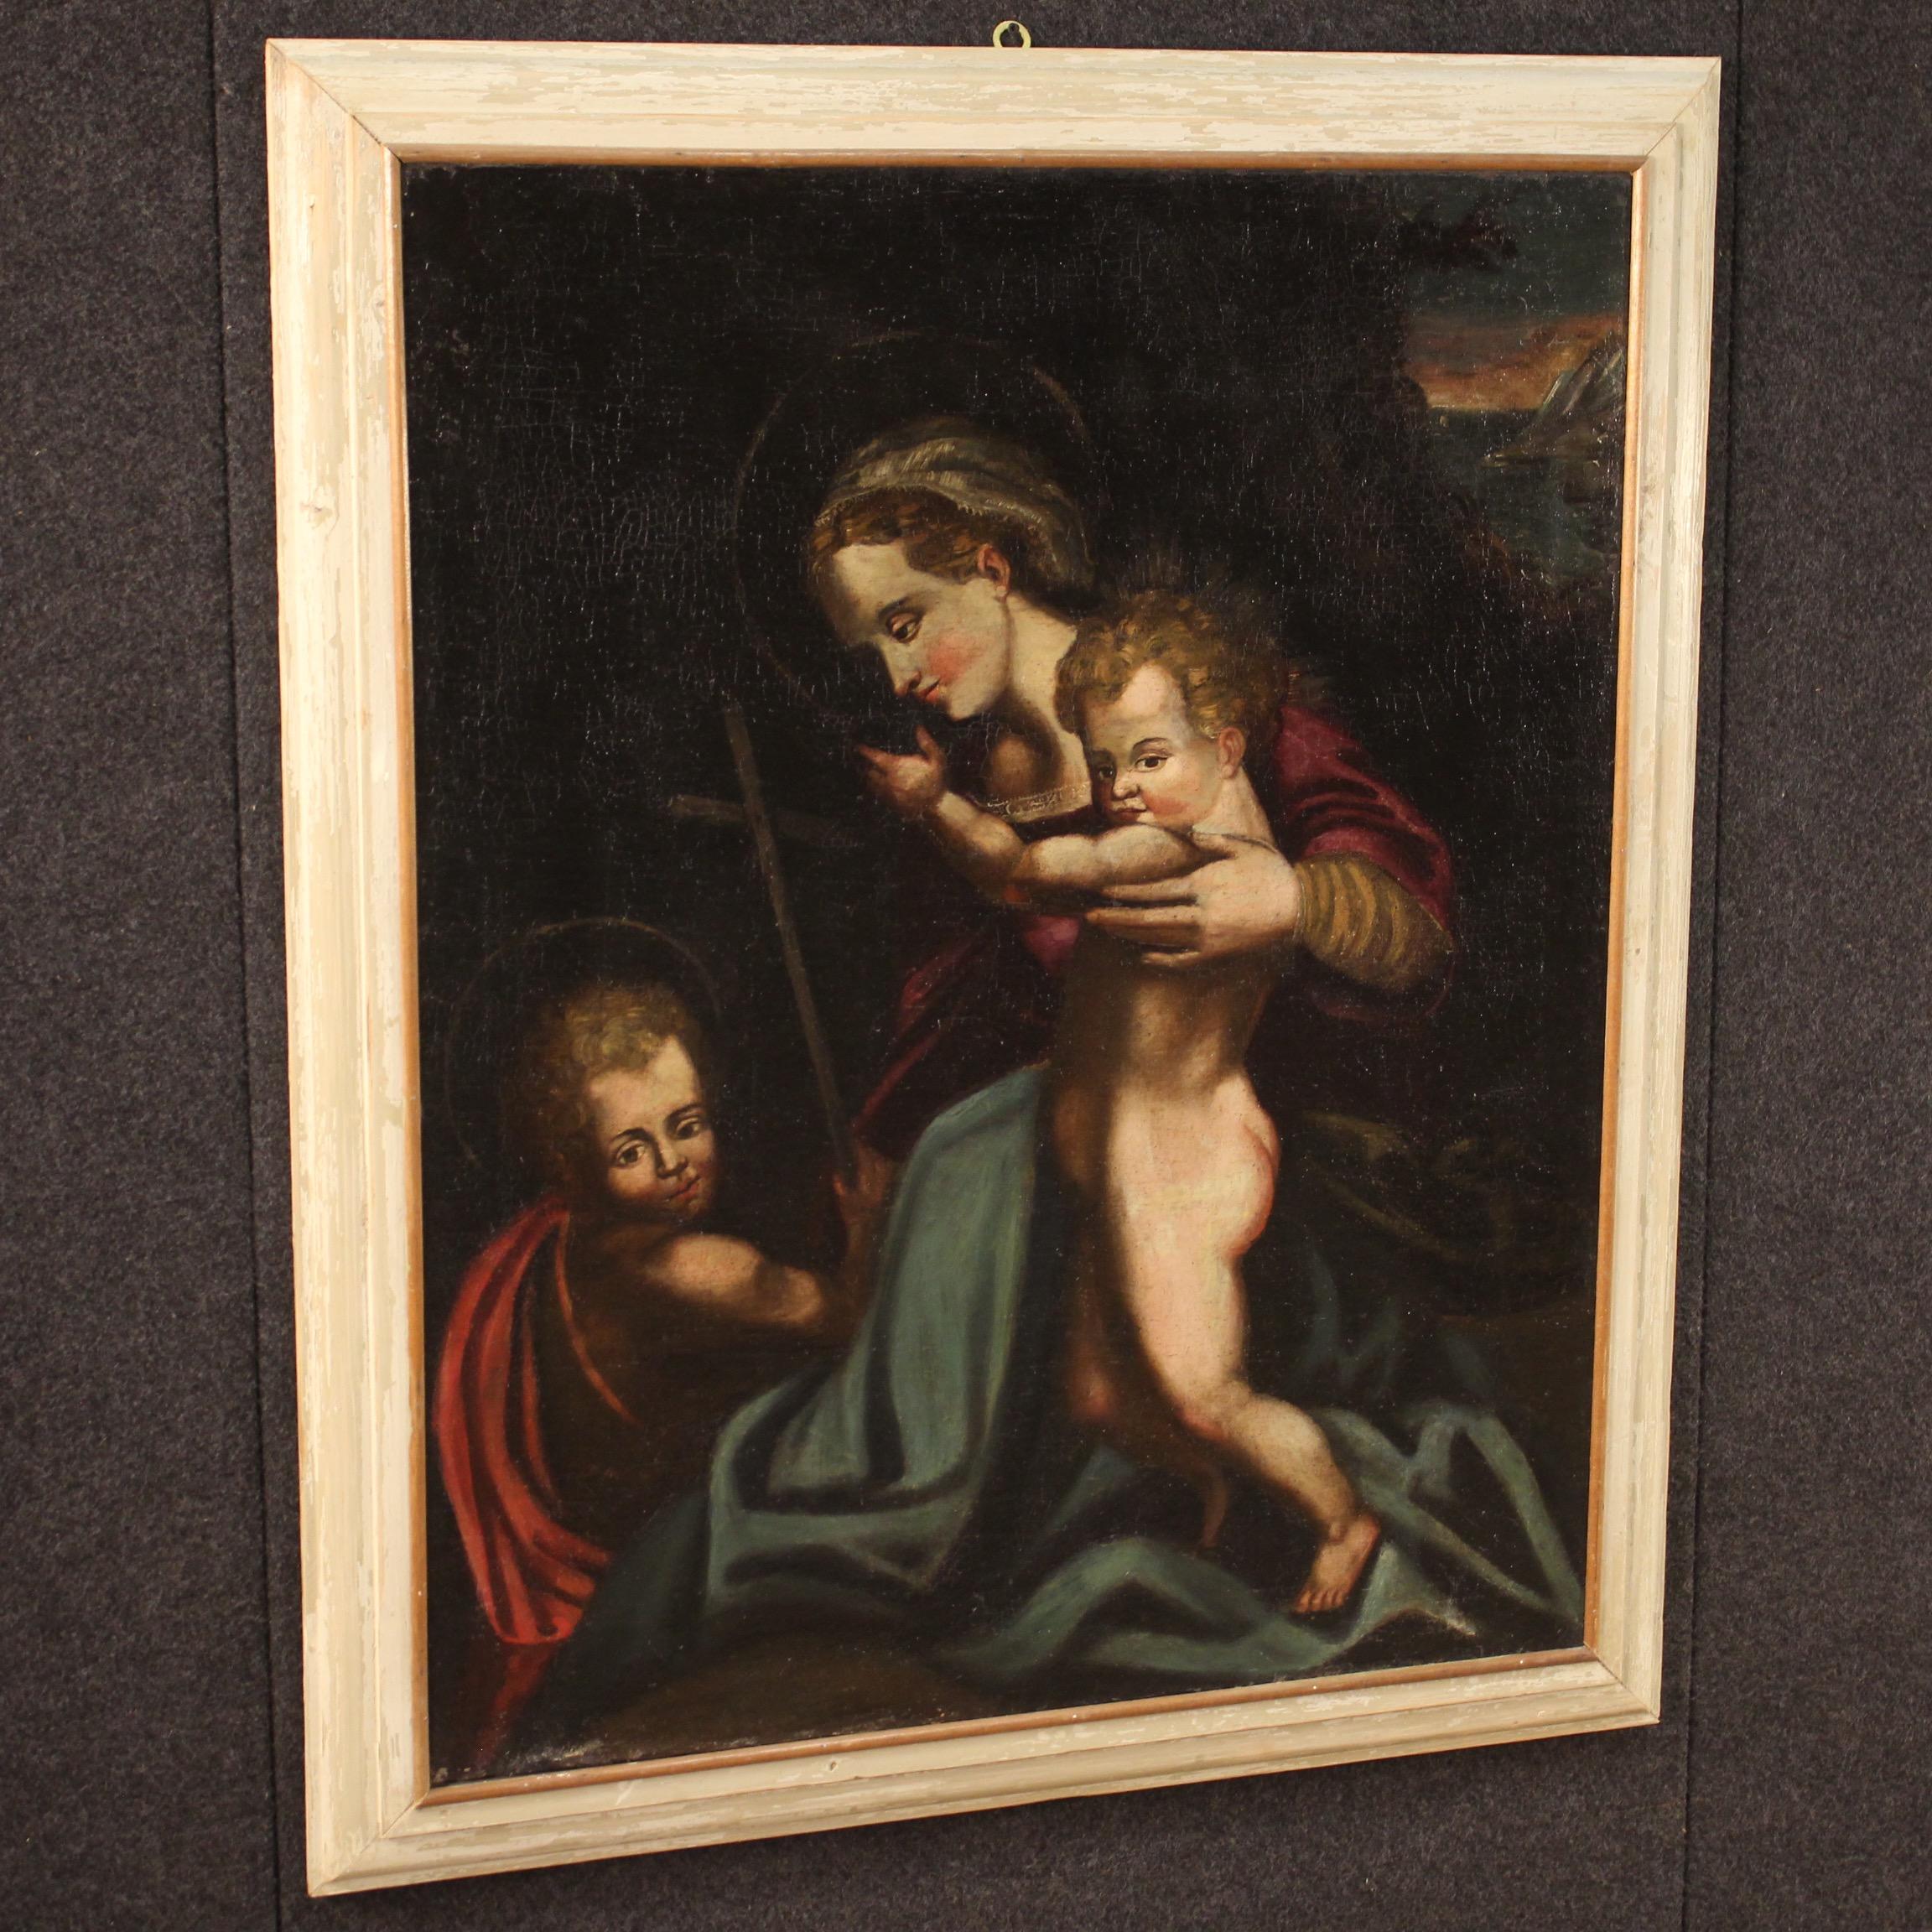 Antique Italian painting from 18th century. Framework oil on canvas depicting a subject of sacred art, Virgin with child and Saint John of good pictorial quality. Modern lacquered wooden frame with various signs of aging and color drops (see photo).